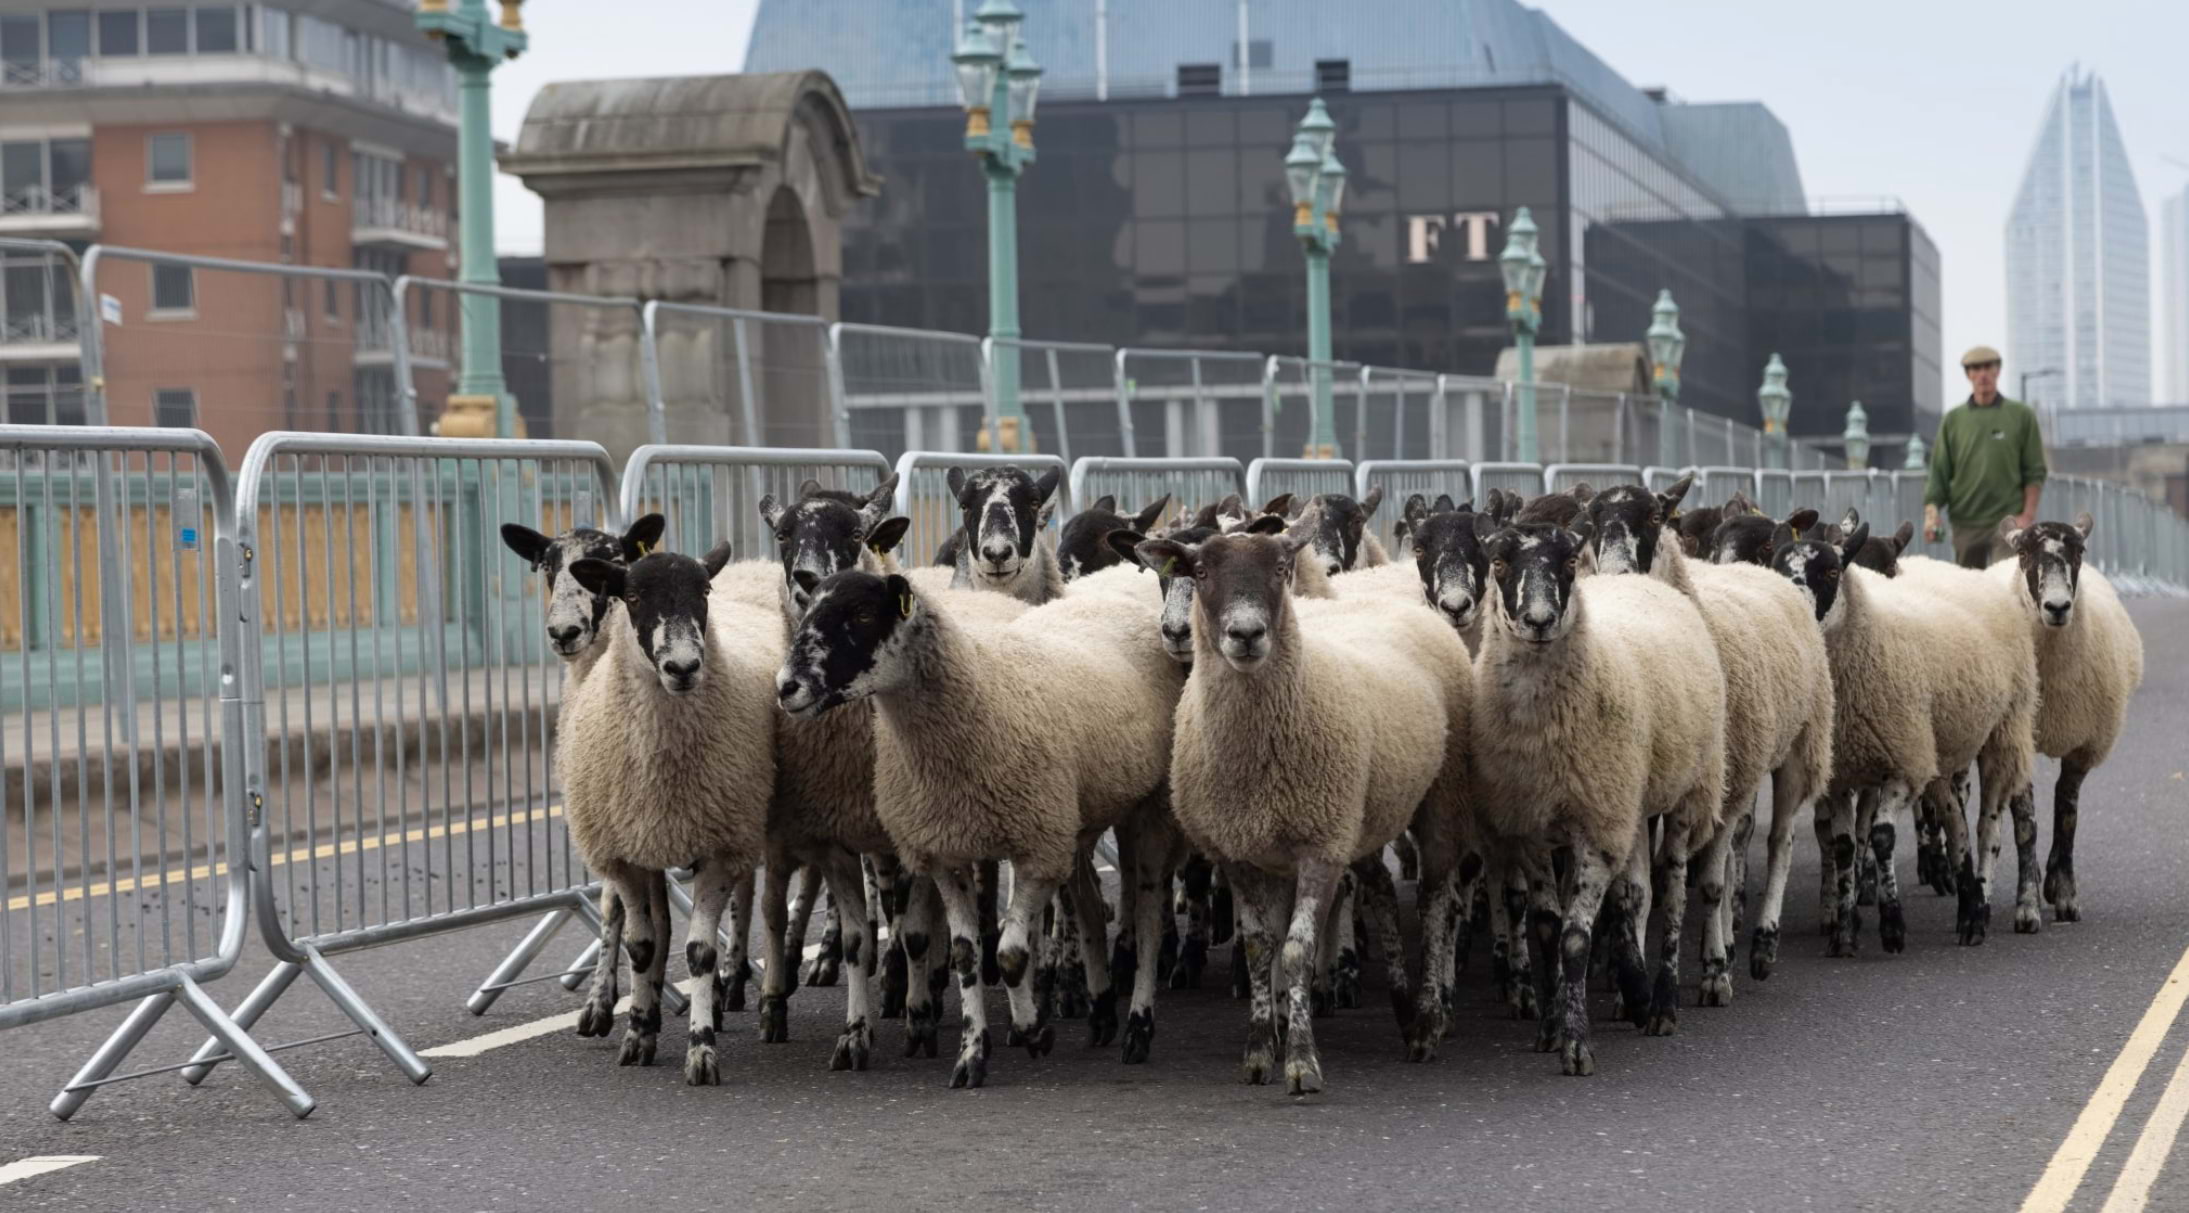 Join in with tradition at the Sheep Drive & Livery Fair